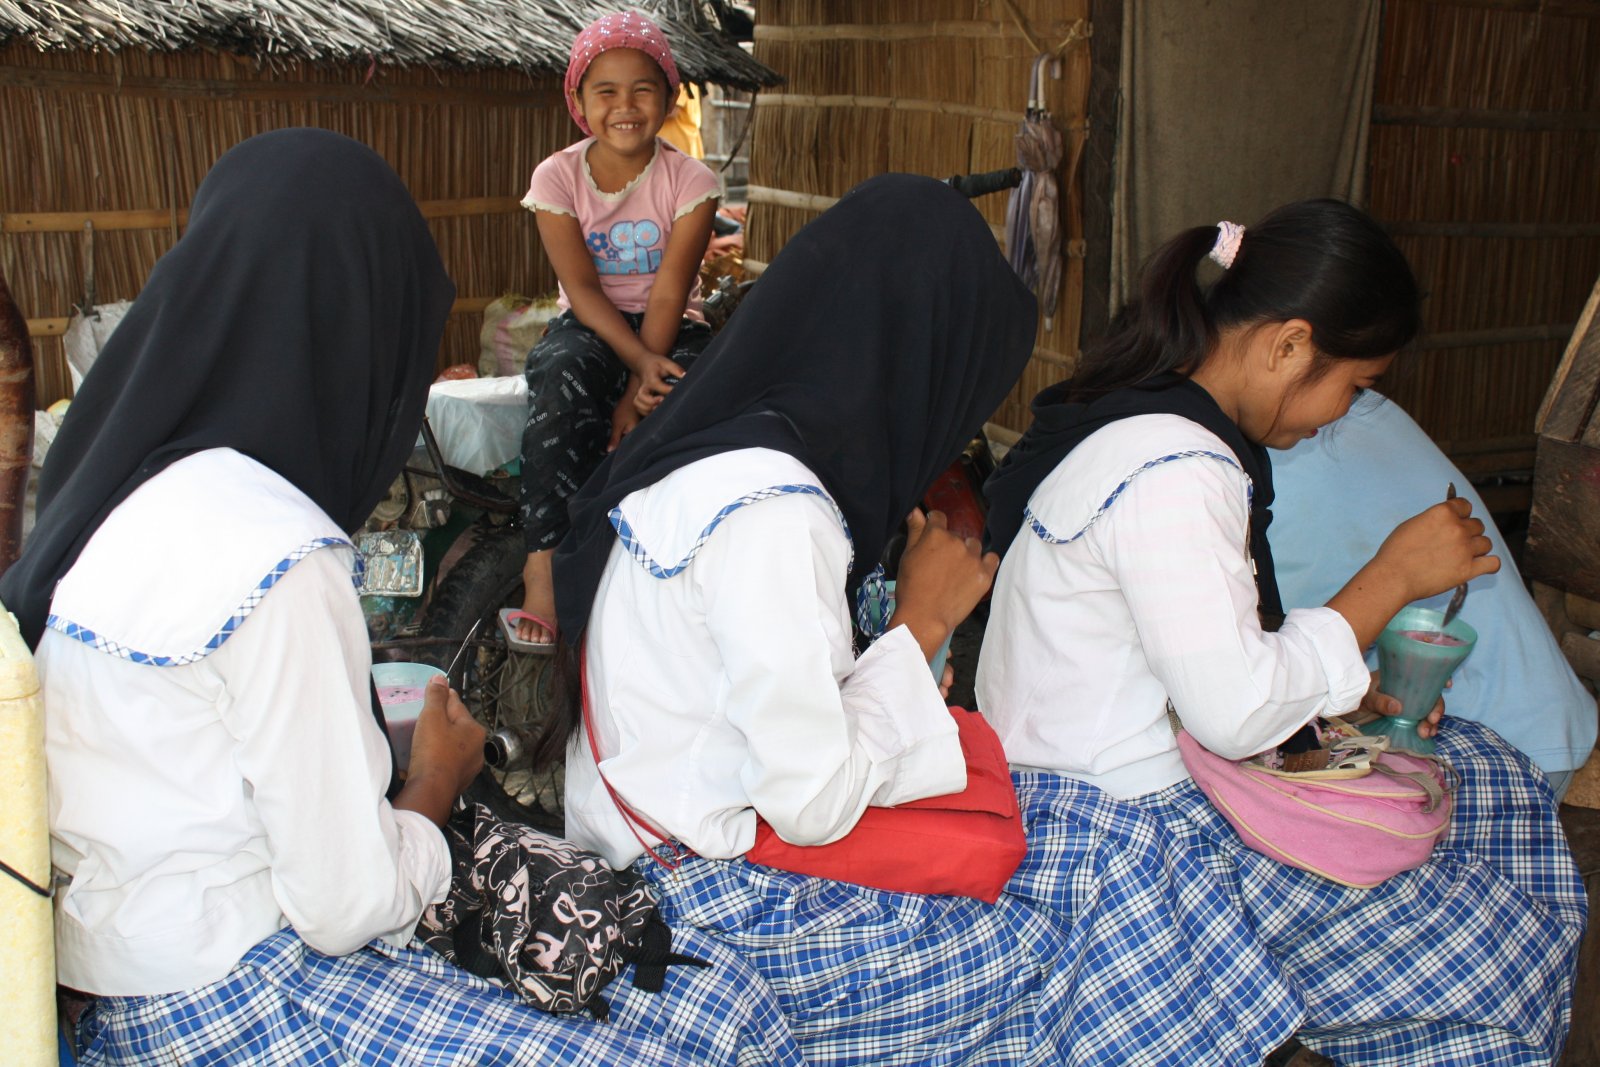 High school girls in their school uniforms take a break at  a food stall at an evacuation camp for internally displaced persons in Maguindanao, Philippines. Behind them is the stall owner's daughter, who is in grade 3. Photo taken on January 28, 2009 by libudsuroy. Creativecommons.